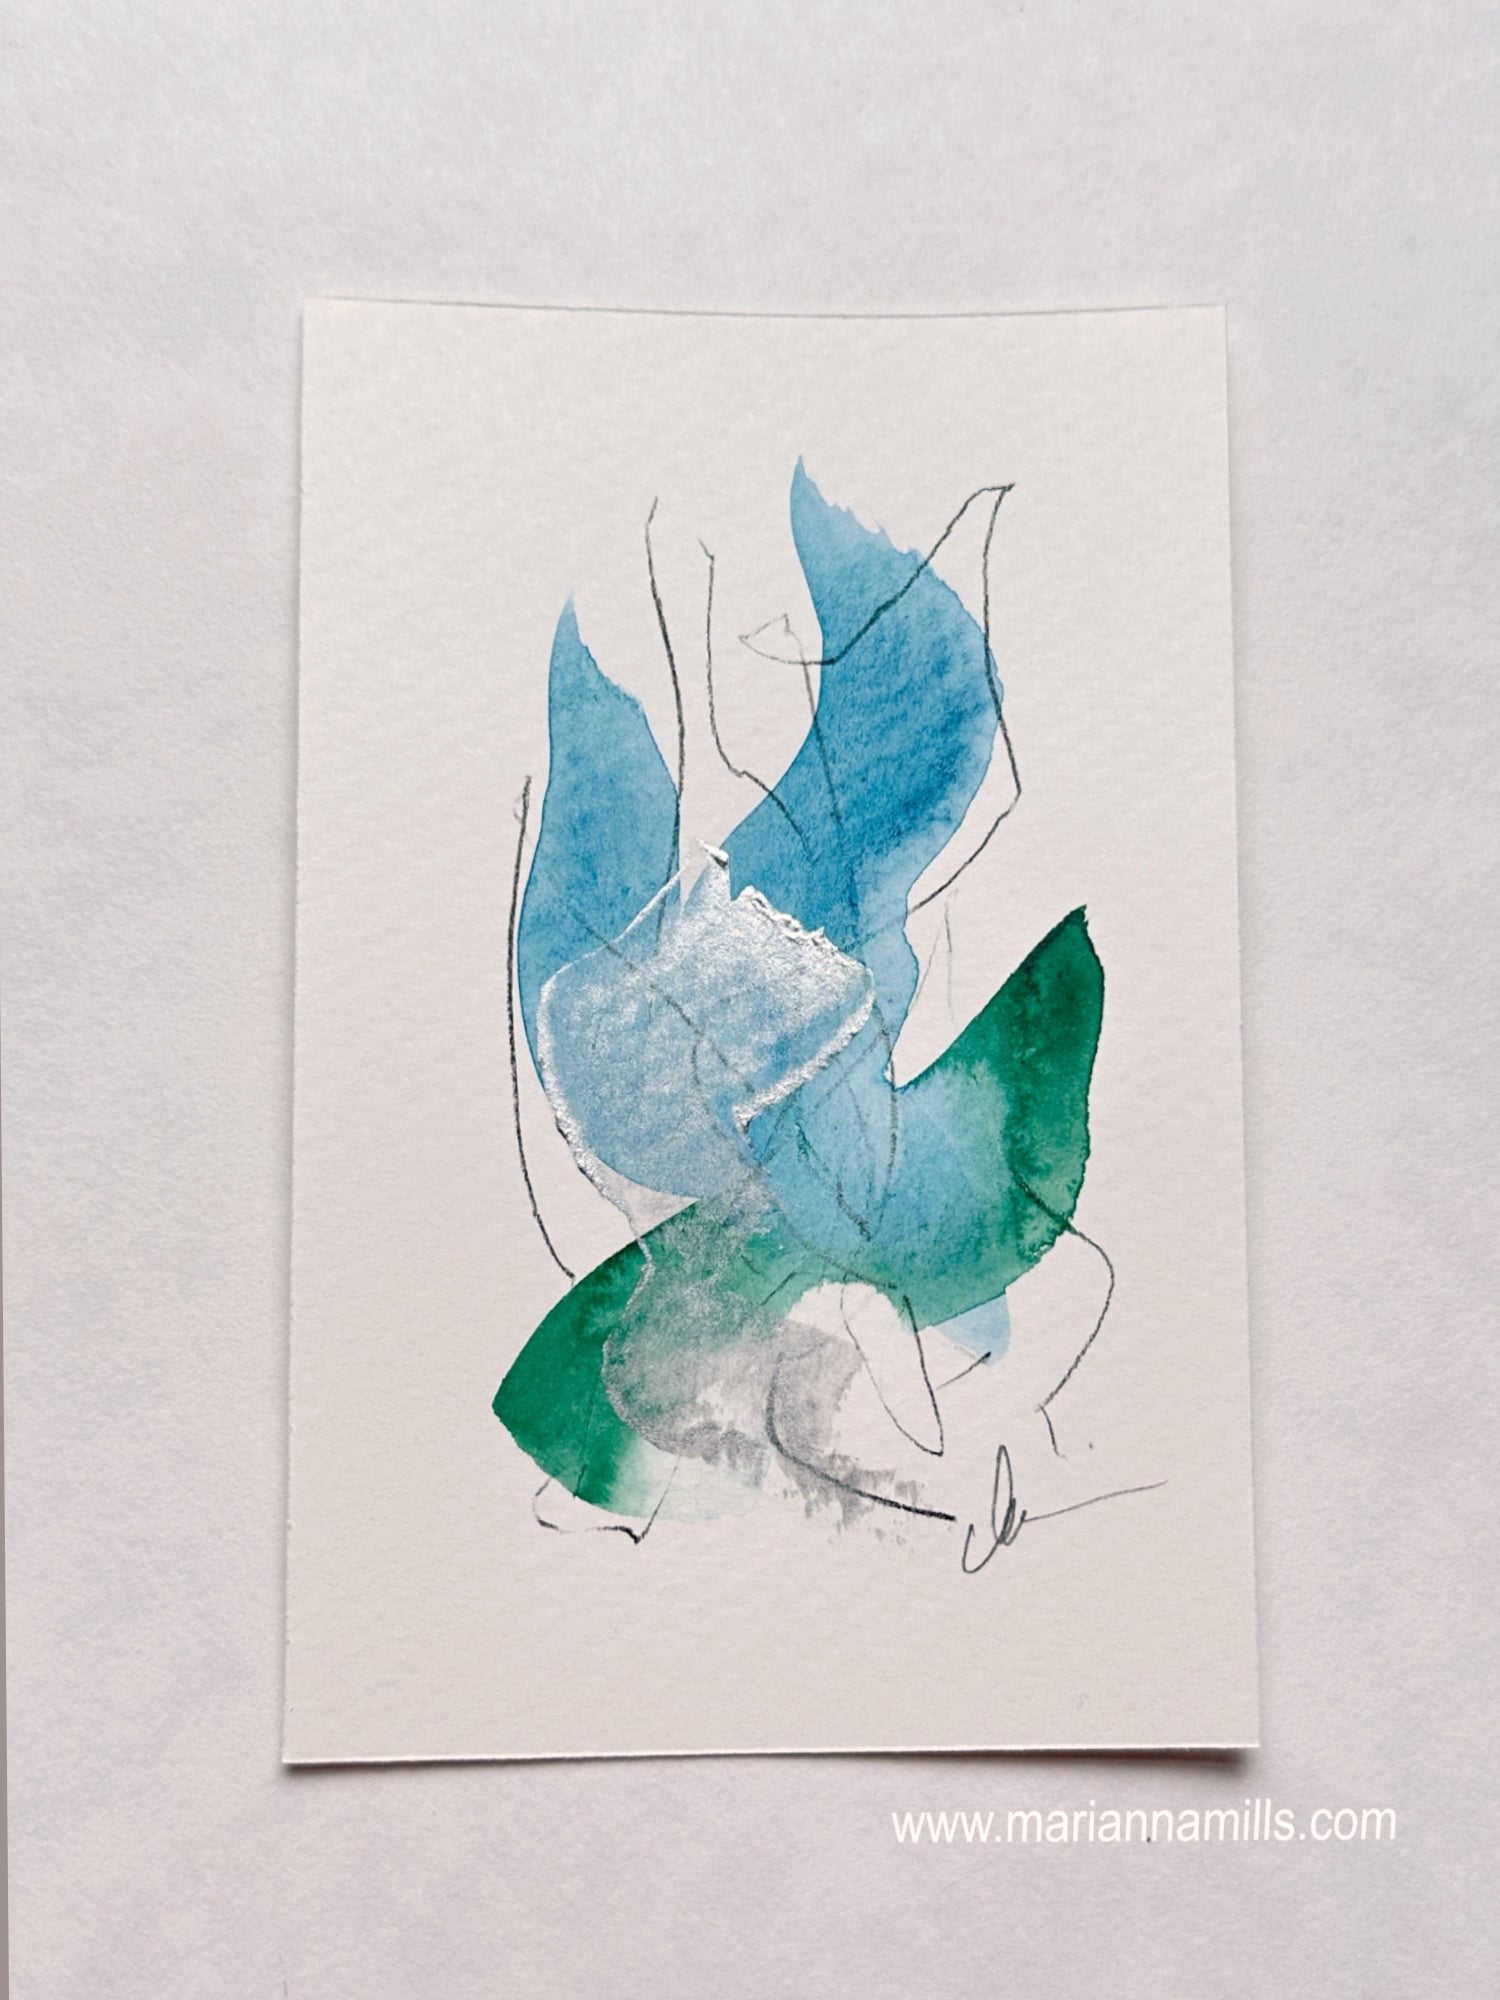 Dove Vol. 1   4"x6" by Marianna Mills mini abstract mixed media painting. Blue and green shades